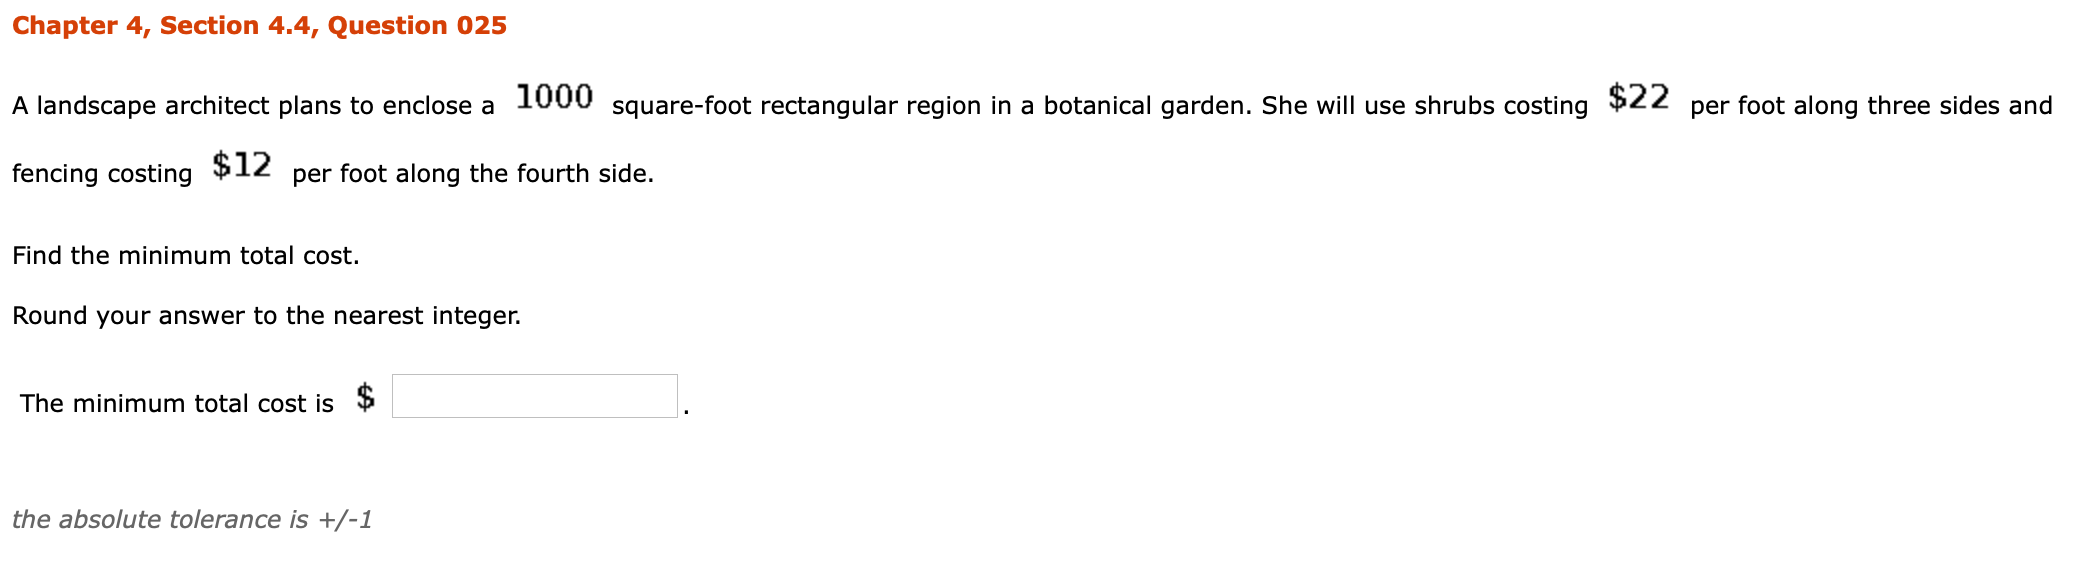 A landscape architect plans to enclose a 1000 square-foot rectangular region in a botanical garden. She will use shrubs costing
$22
per
foot along three sides and
fencing costing
$12
per foot along the fourth side.
Find the minimum total cost.
Round your answer to the nearest integer.
The minimum total cost is
